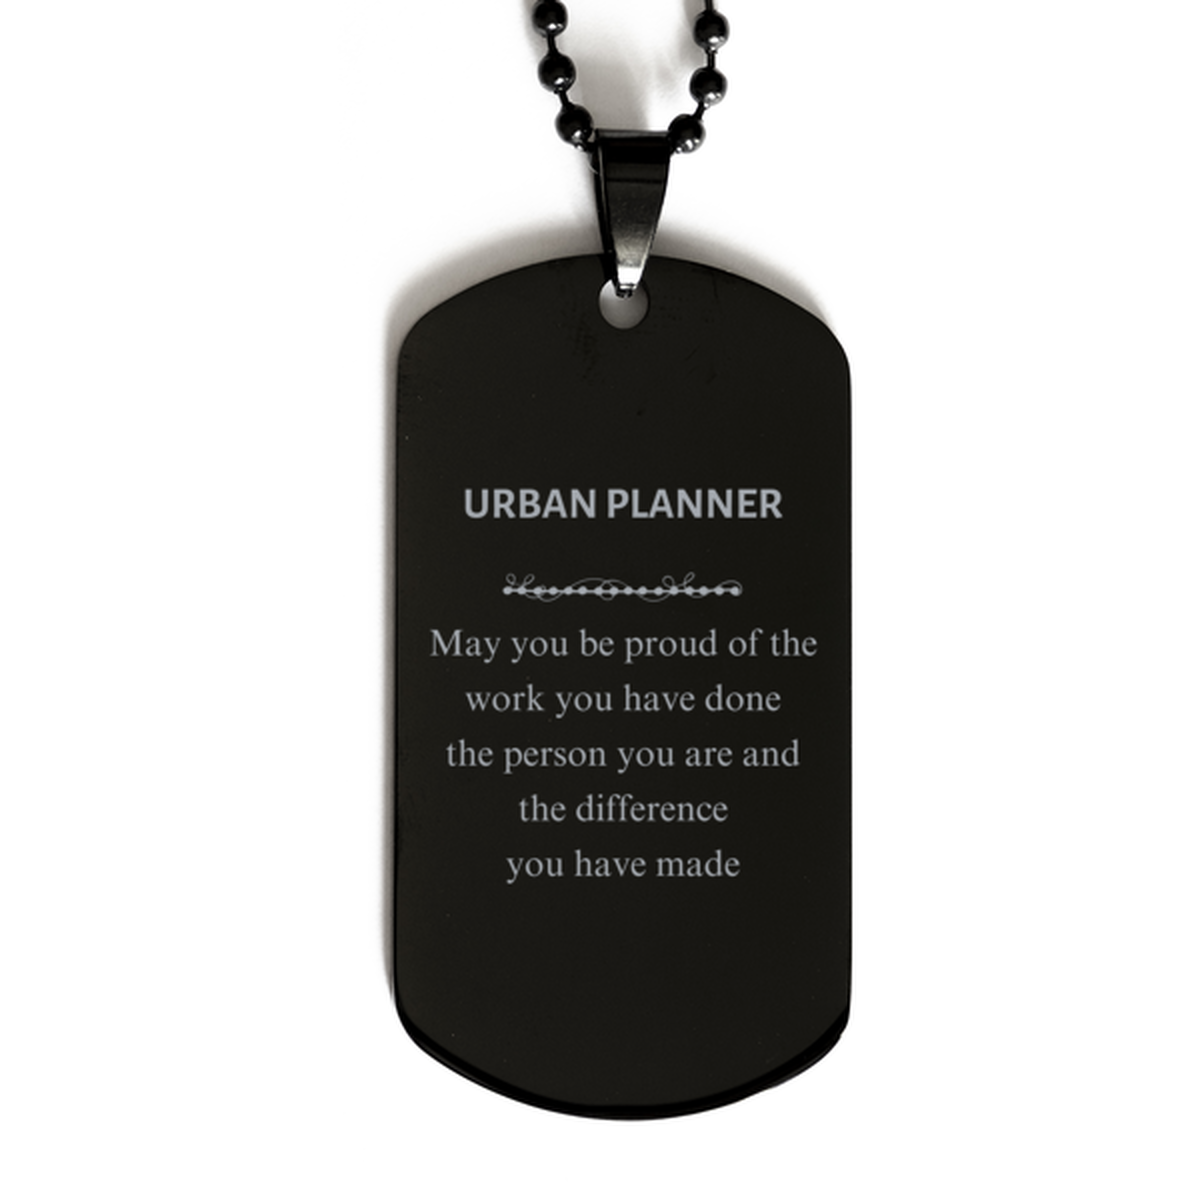 Urban Planner May you be proud of the work you have done, Retirement Urban Planner Black Dog Tag for Colleague Appreciation Gifts Amazing for Urban Planner